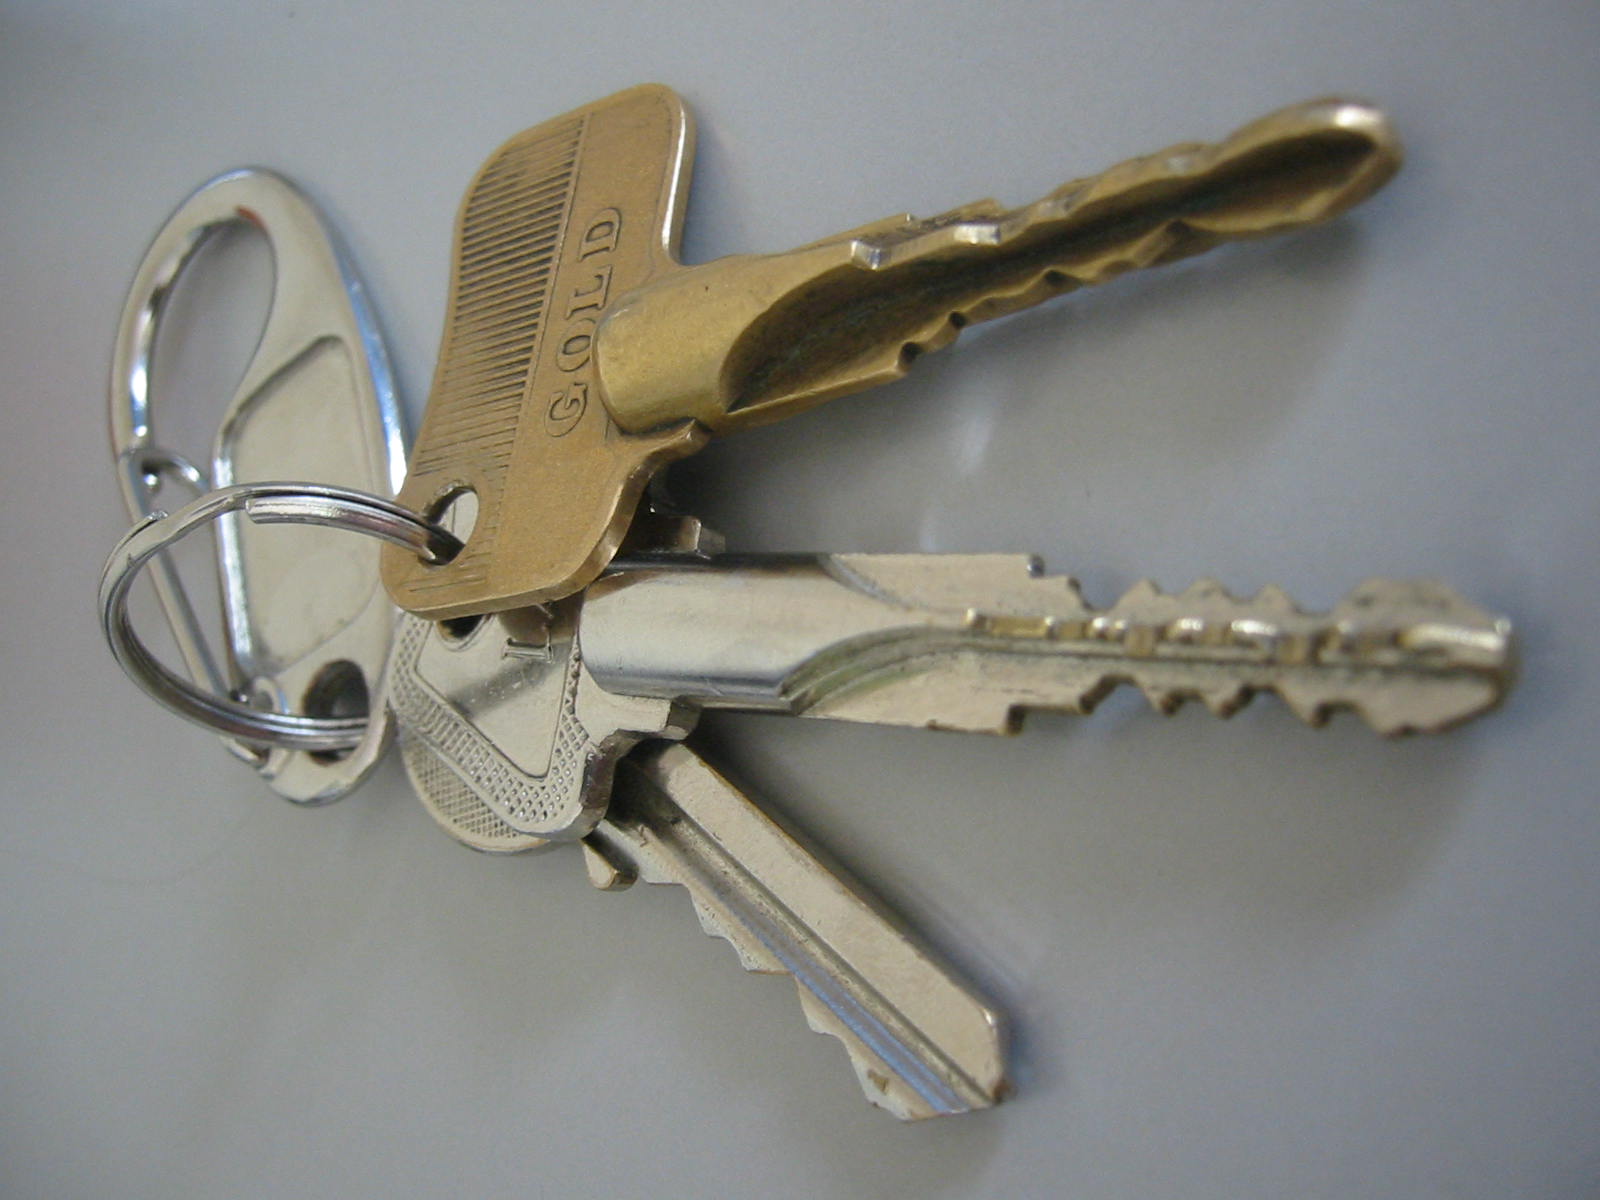 a golden key with five keys that is attached to a silver string